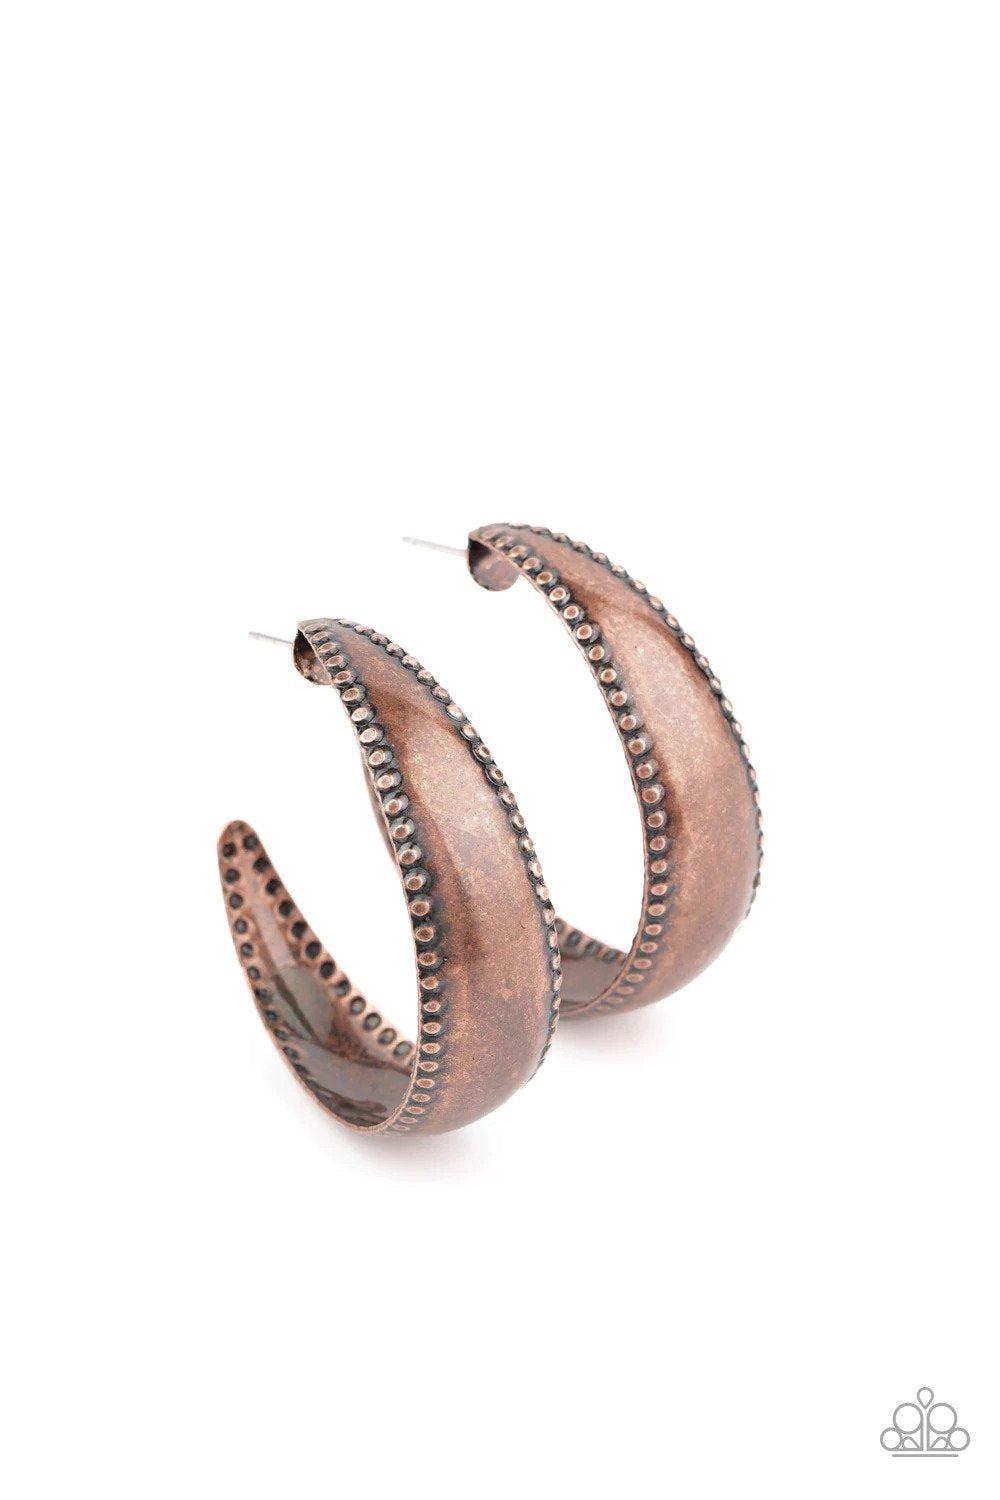 Burnished Benevolence Copper Earrings - Paparazzi Accessories- lightbox - CarasShop.com - $5 Jewelry by Cara Jewels